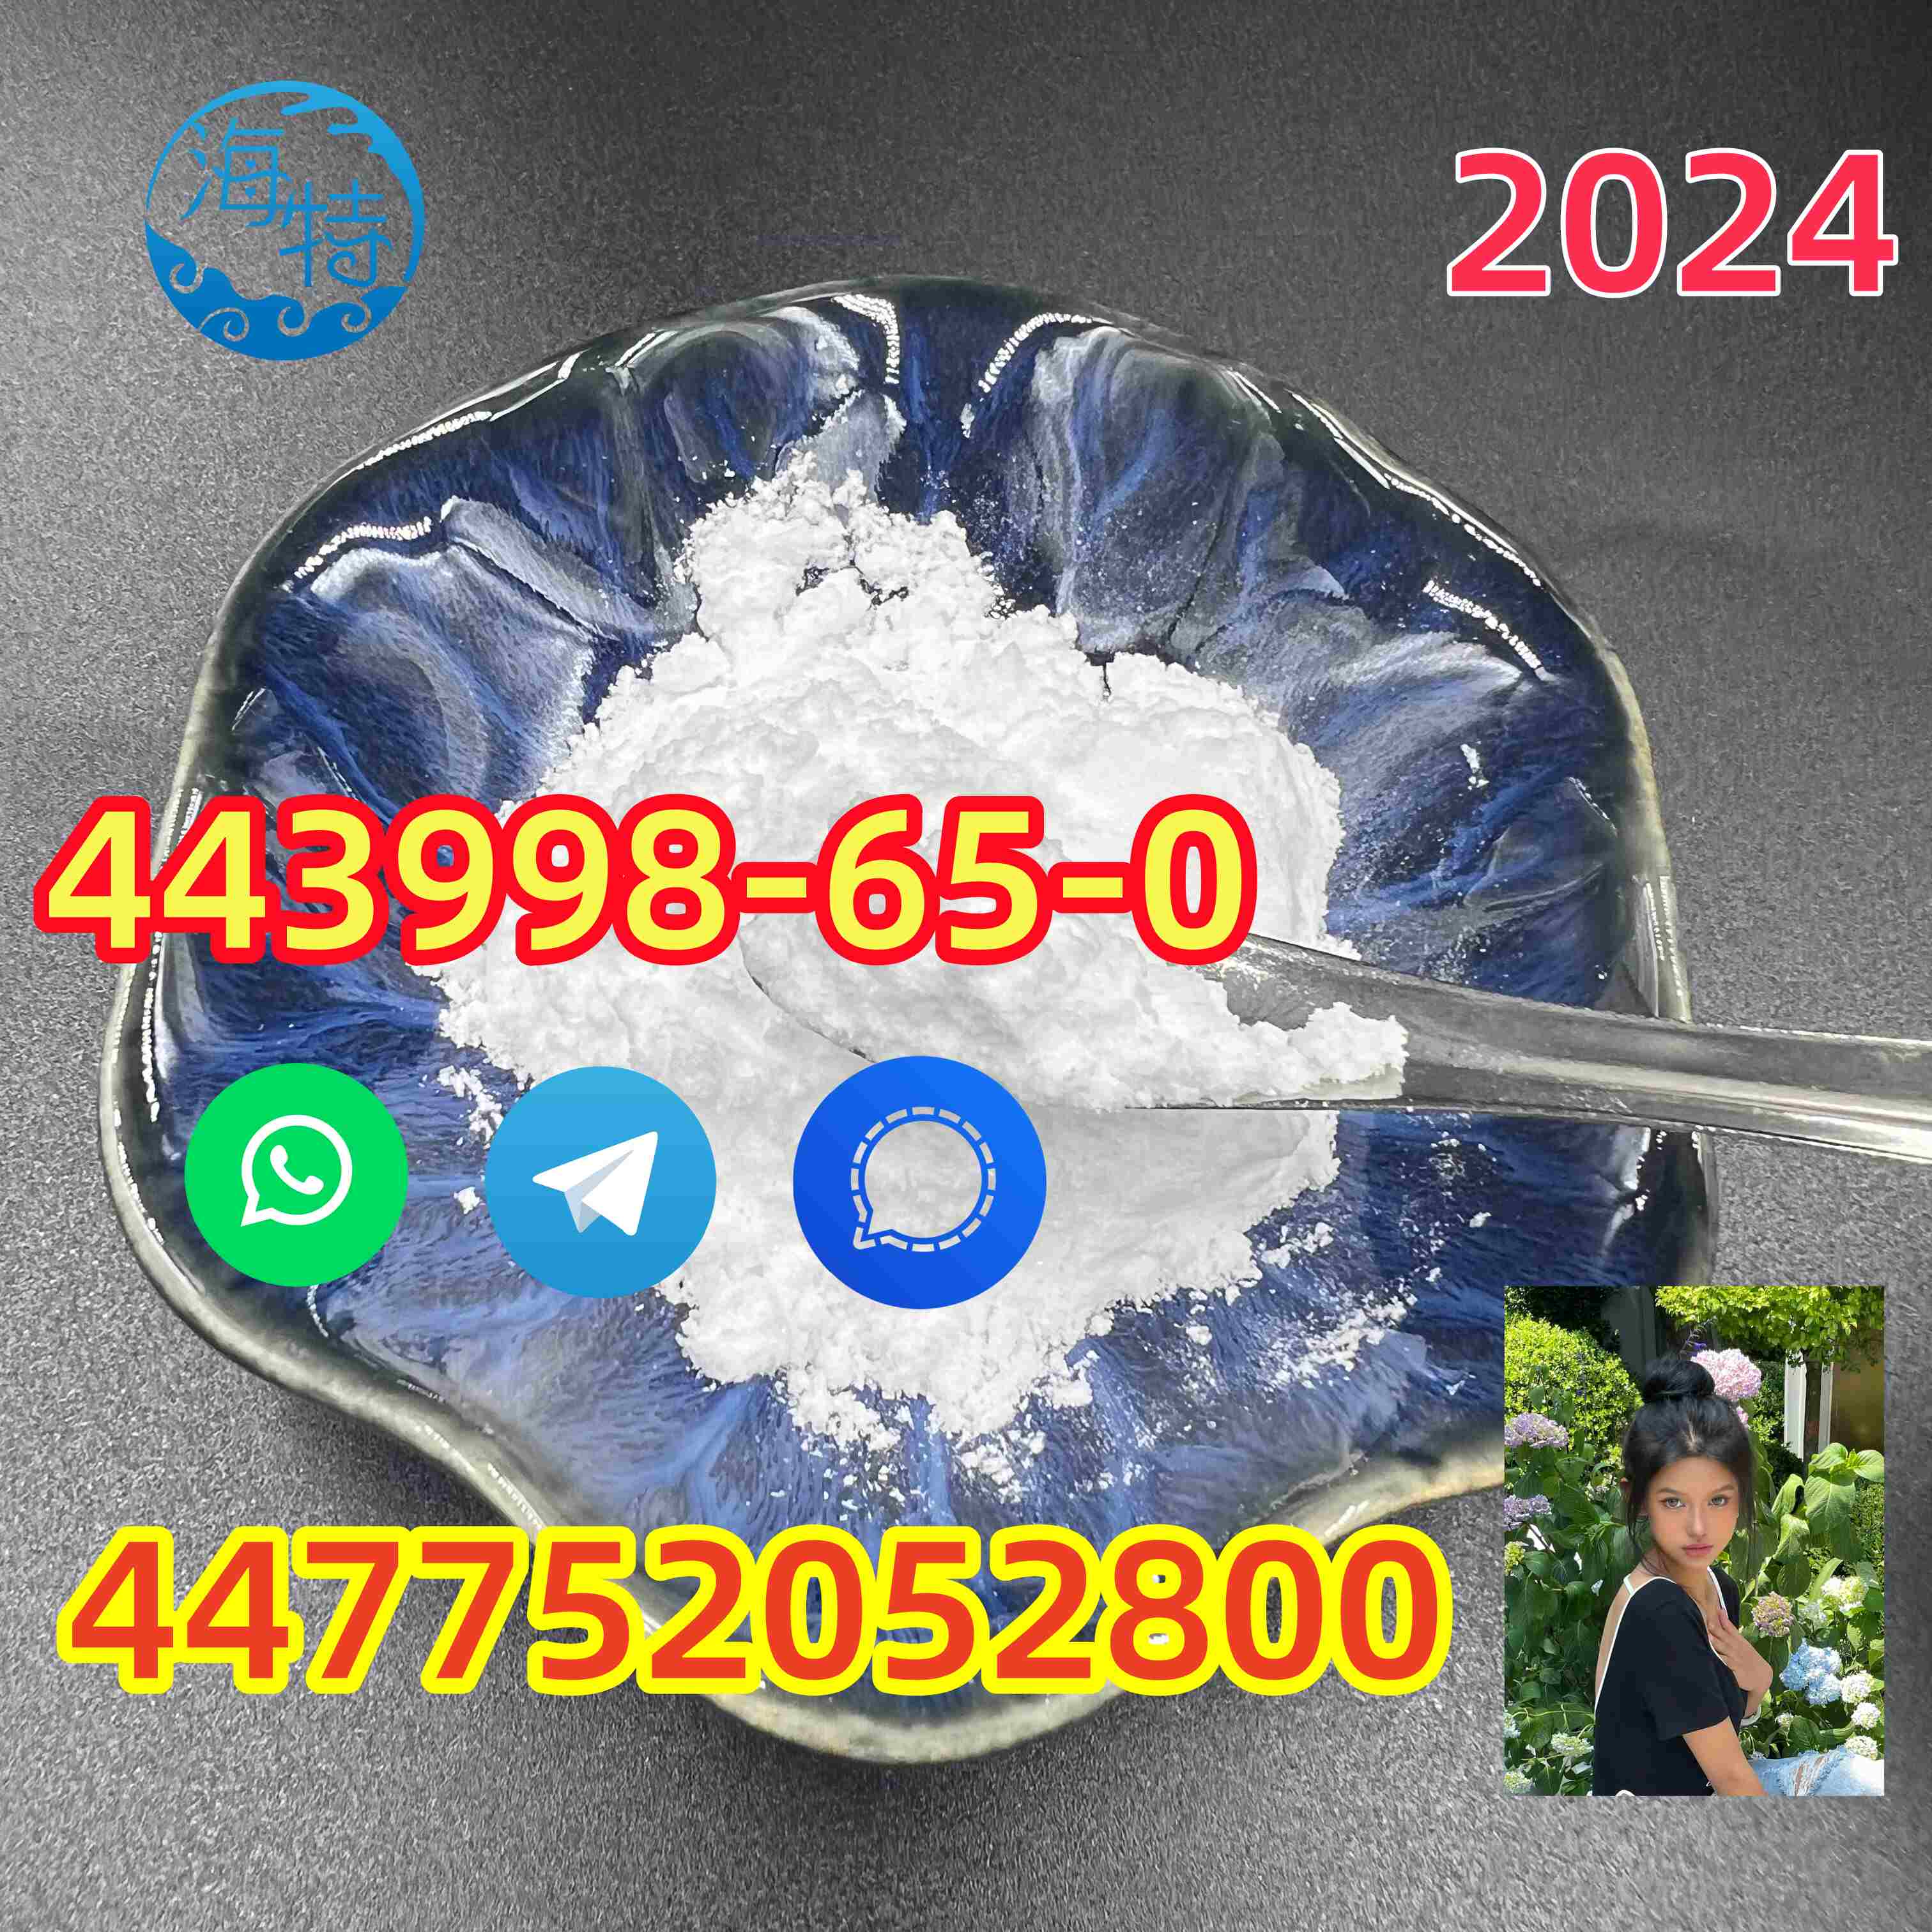 If you need any drug or want to know any drug,pls Add us on WhatsApp/telegram/signal：+44 7752052800